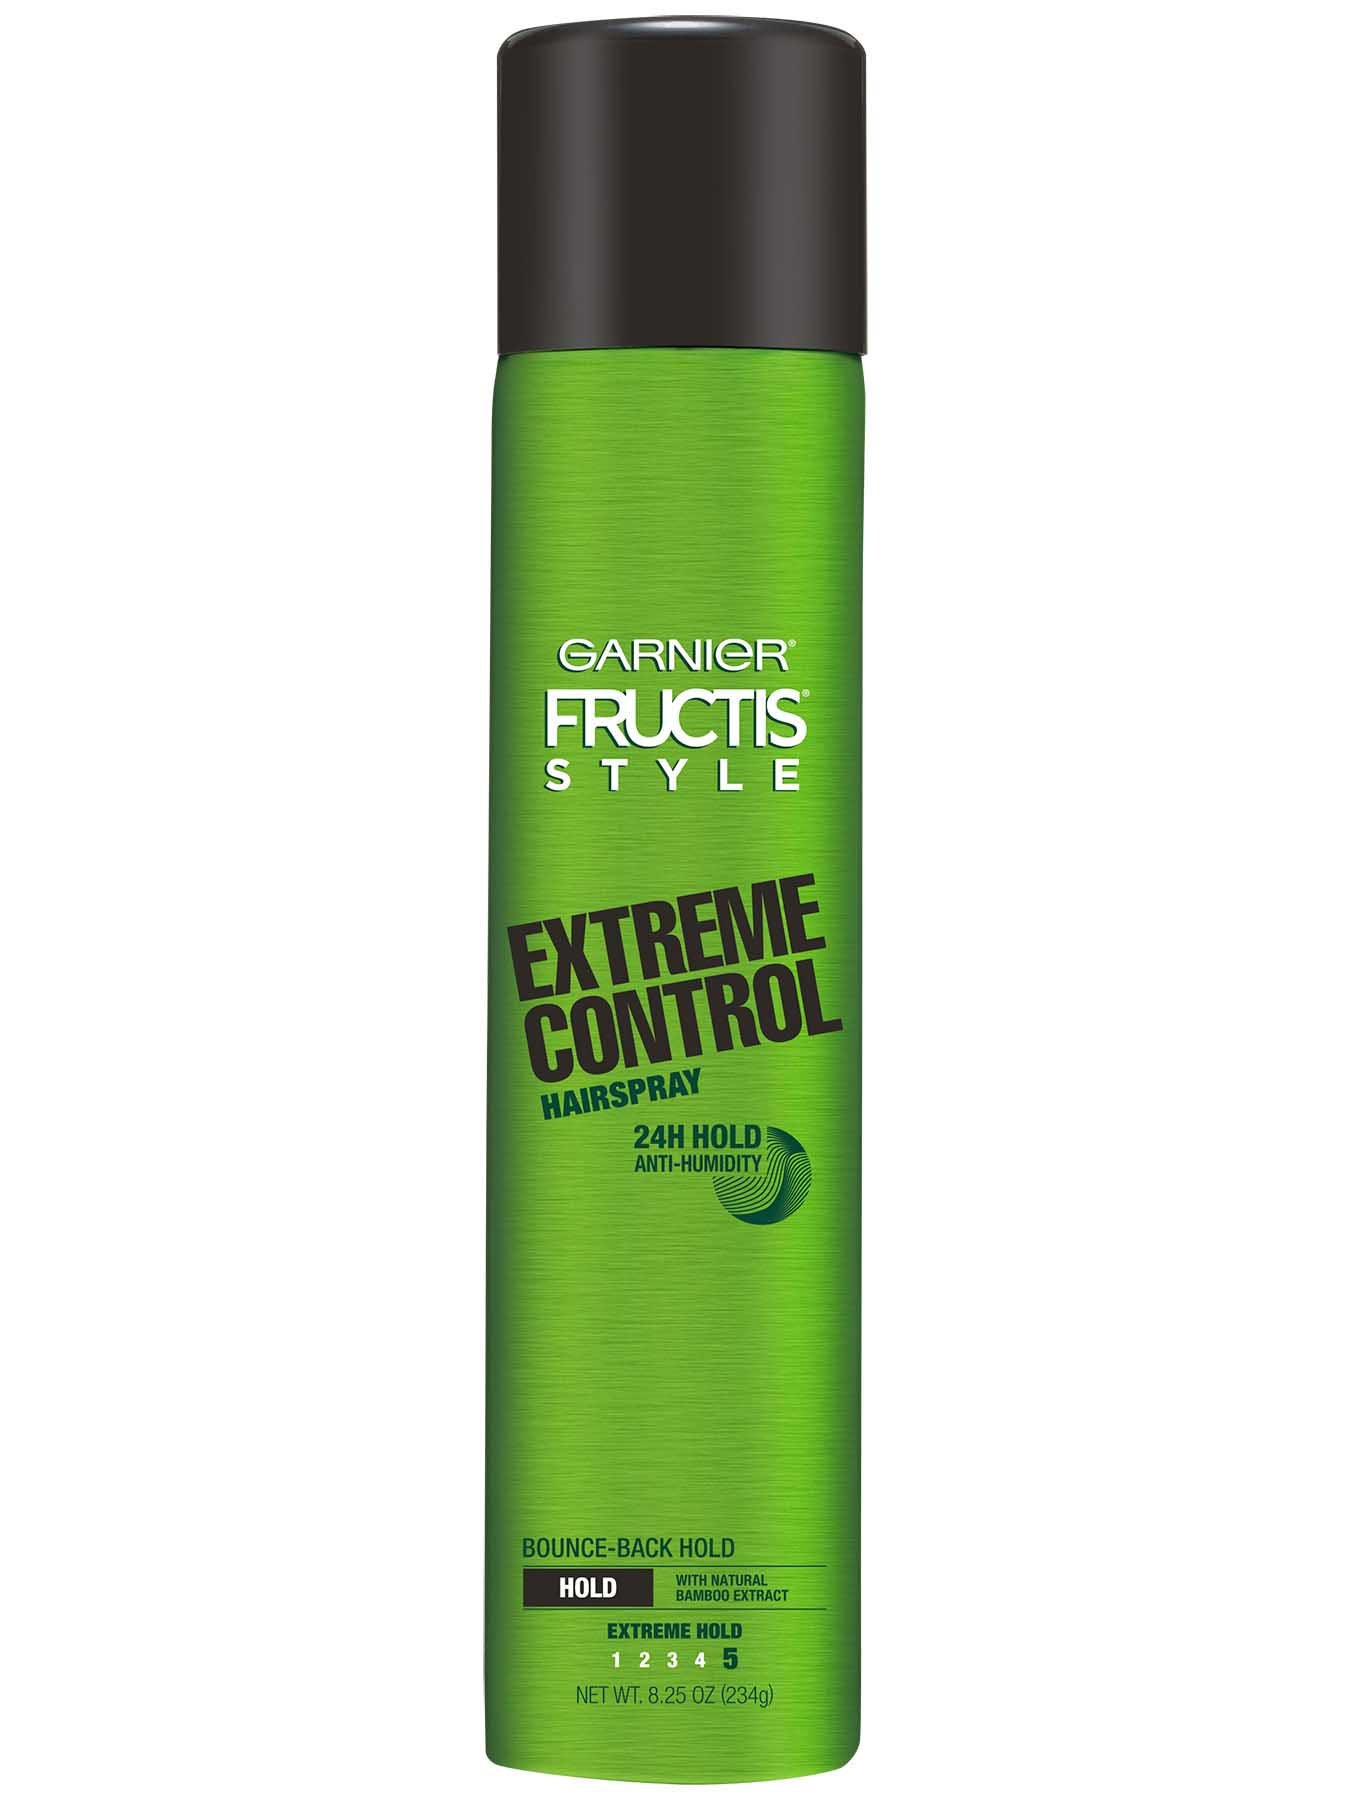 Front view of Extreme Control Anti-Humidity Aerosol Hair Spray.